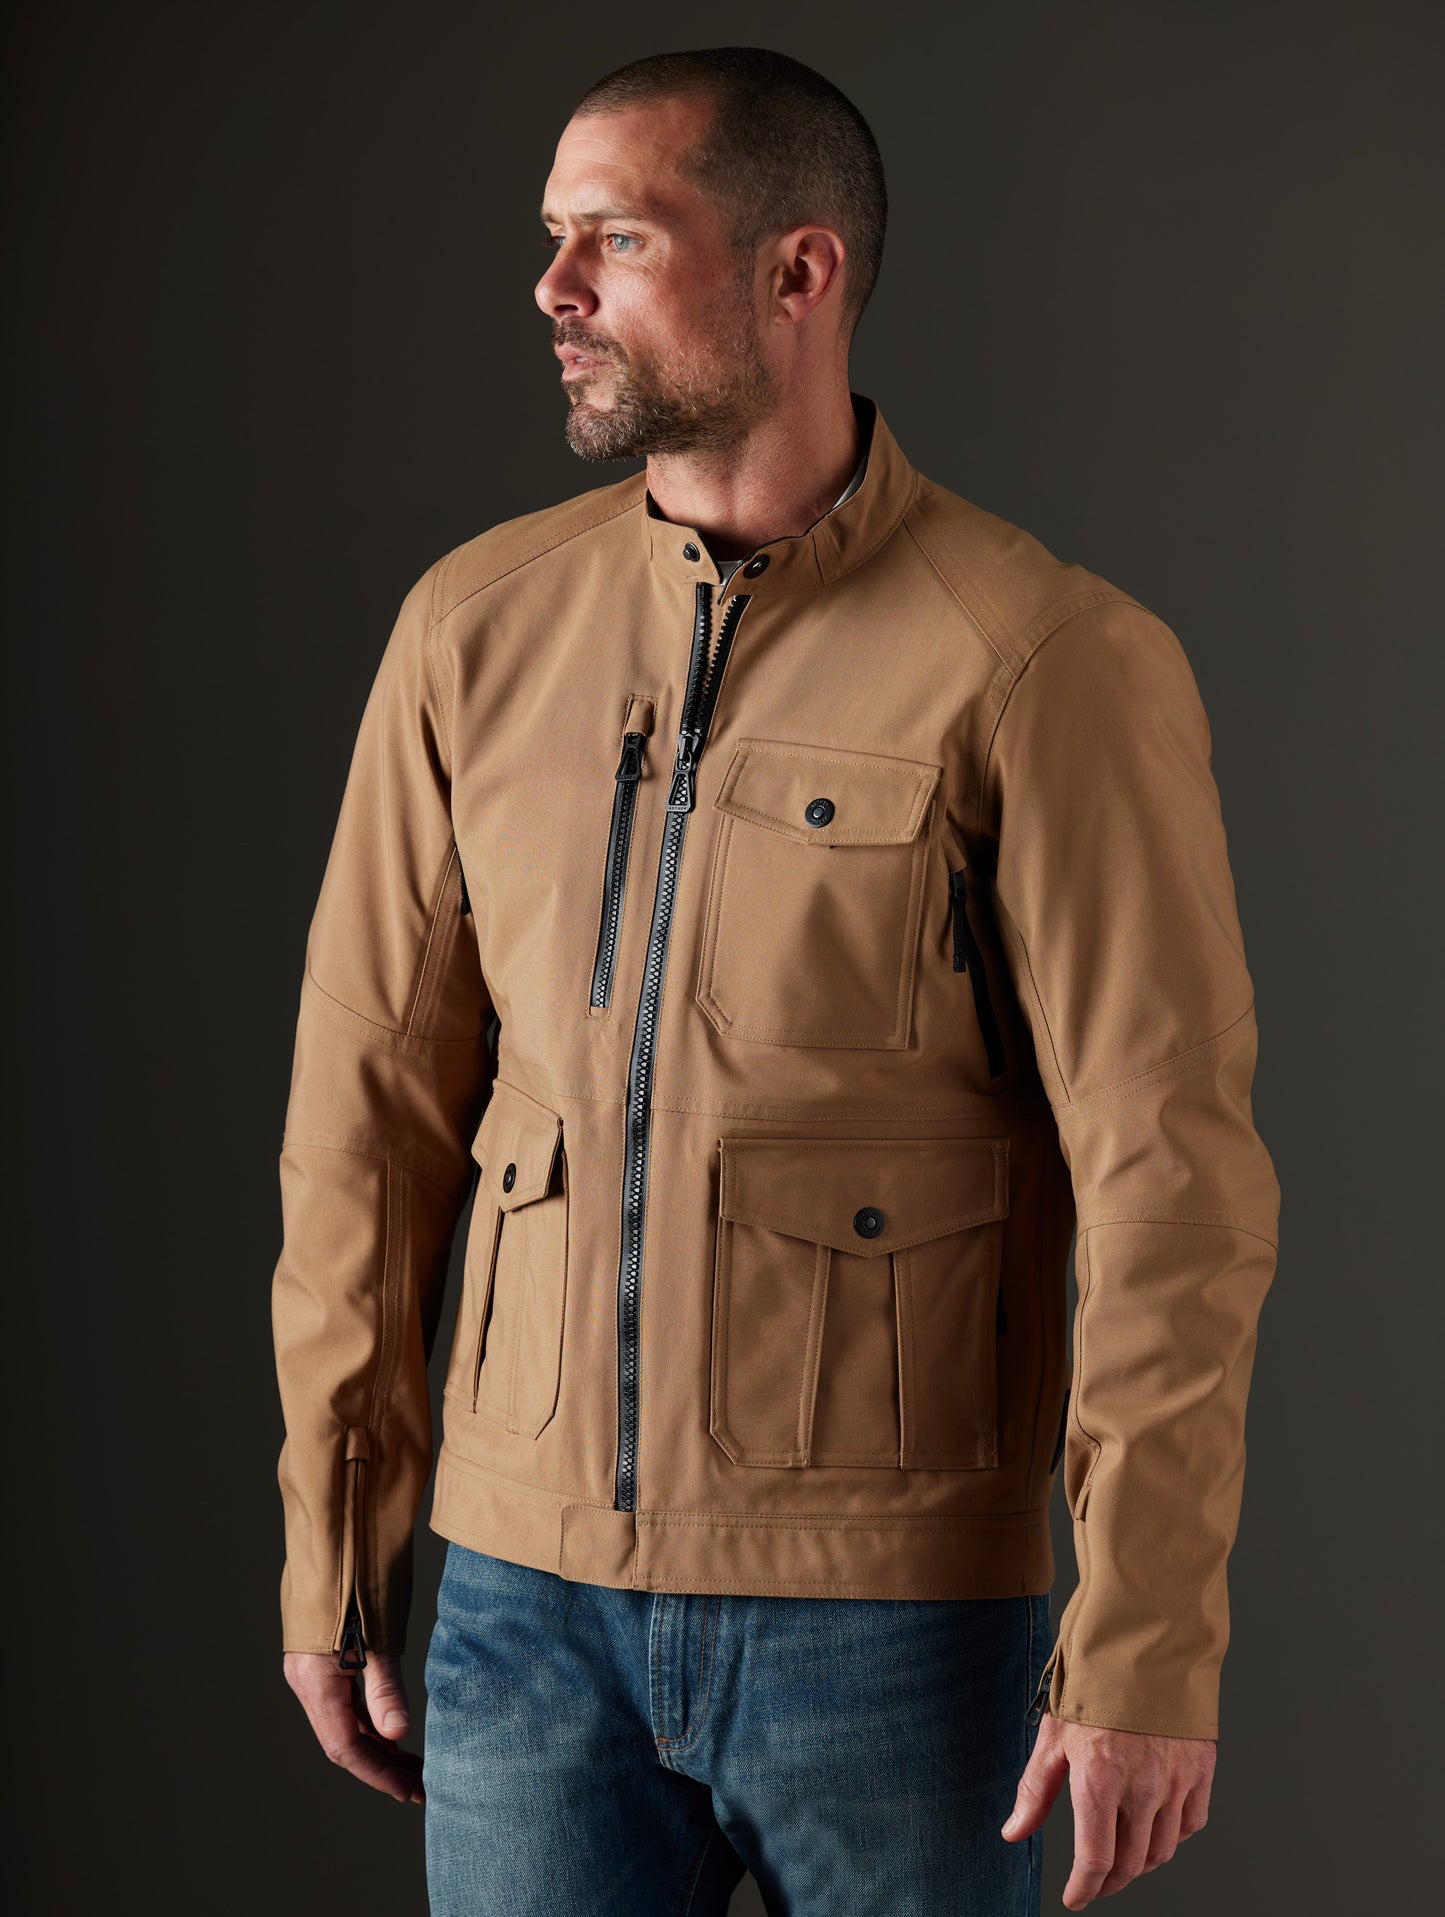 Man wearing brown motorcycle jacket from AETHER Apparel